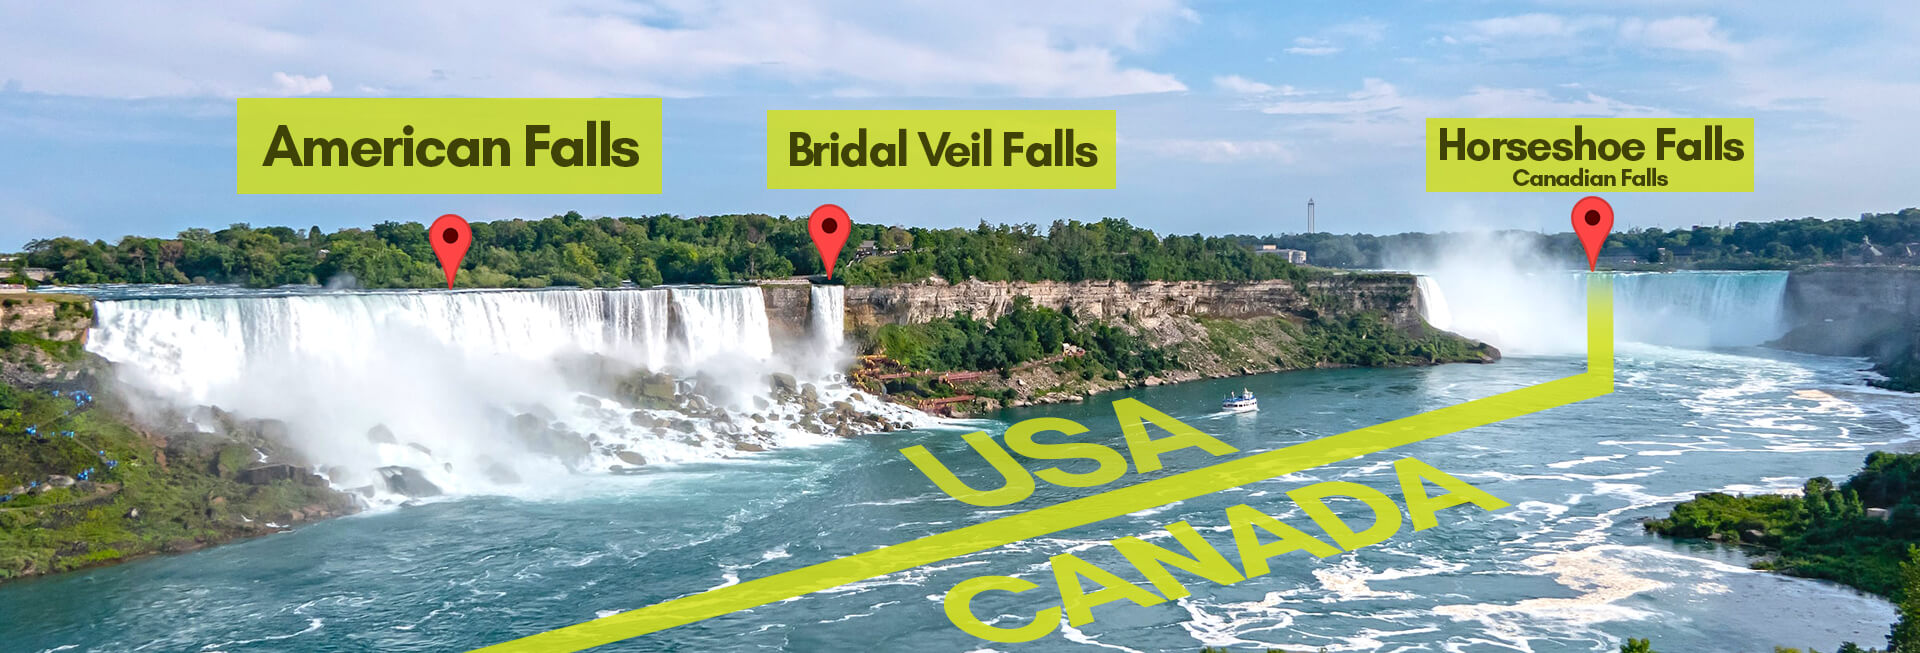 which is american falls and where is located with map pin